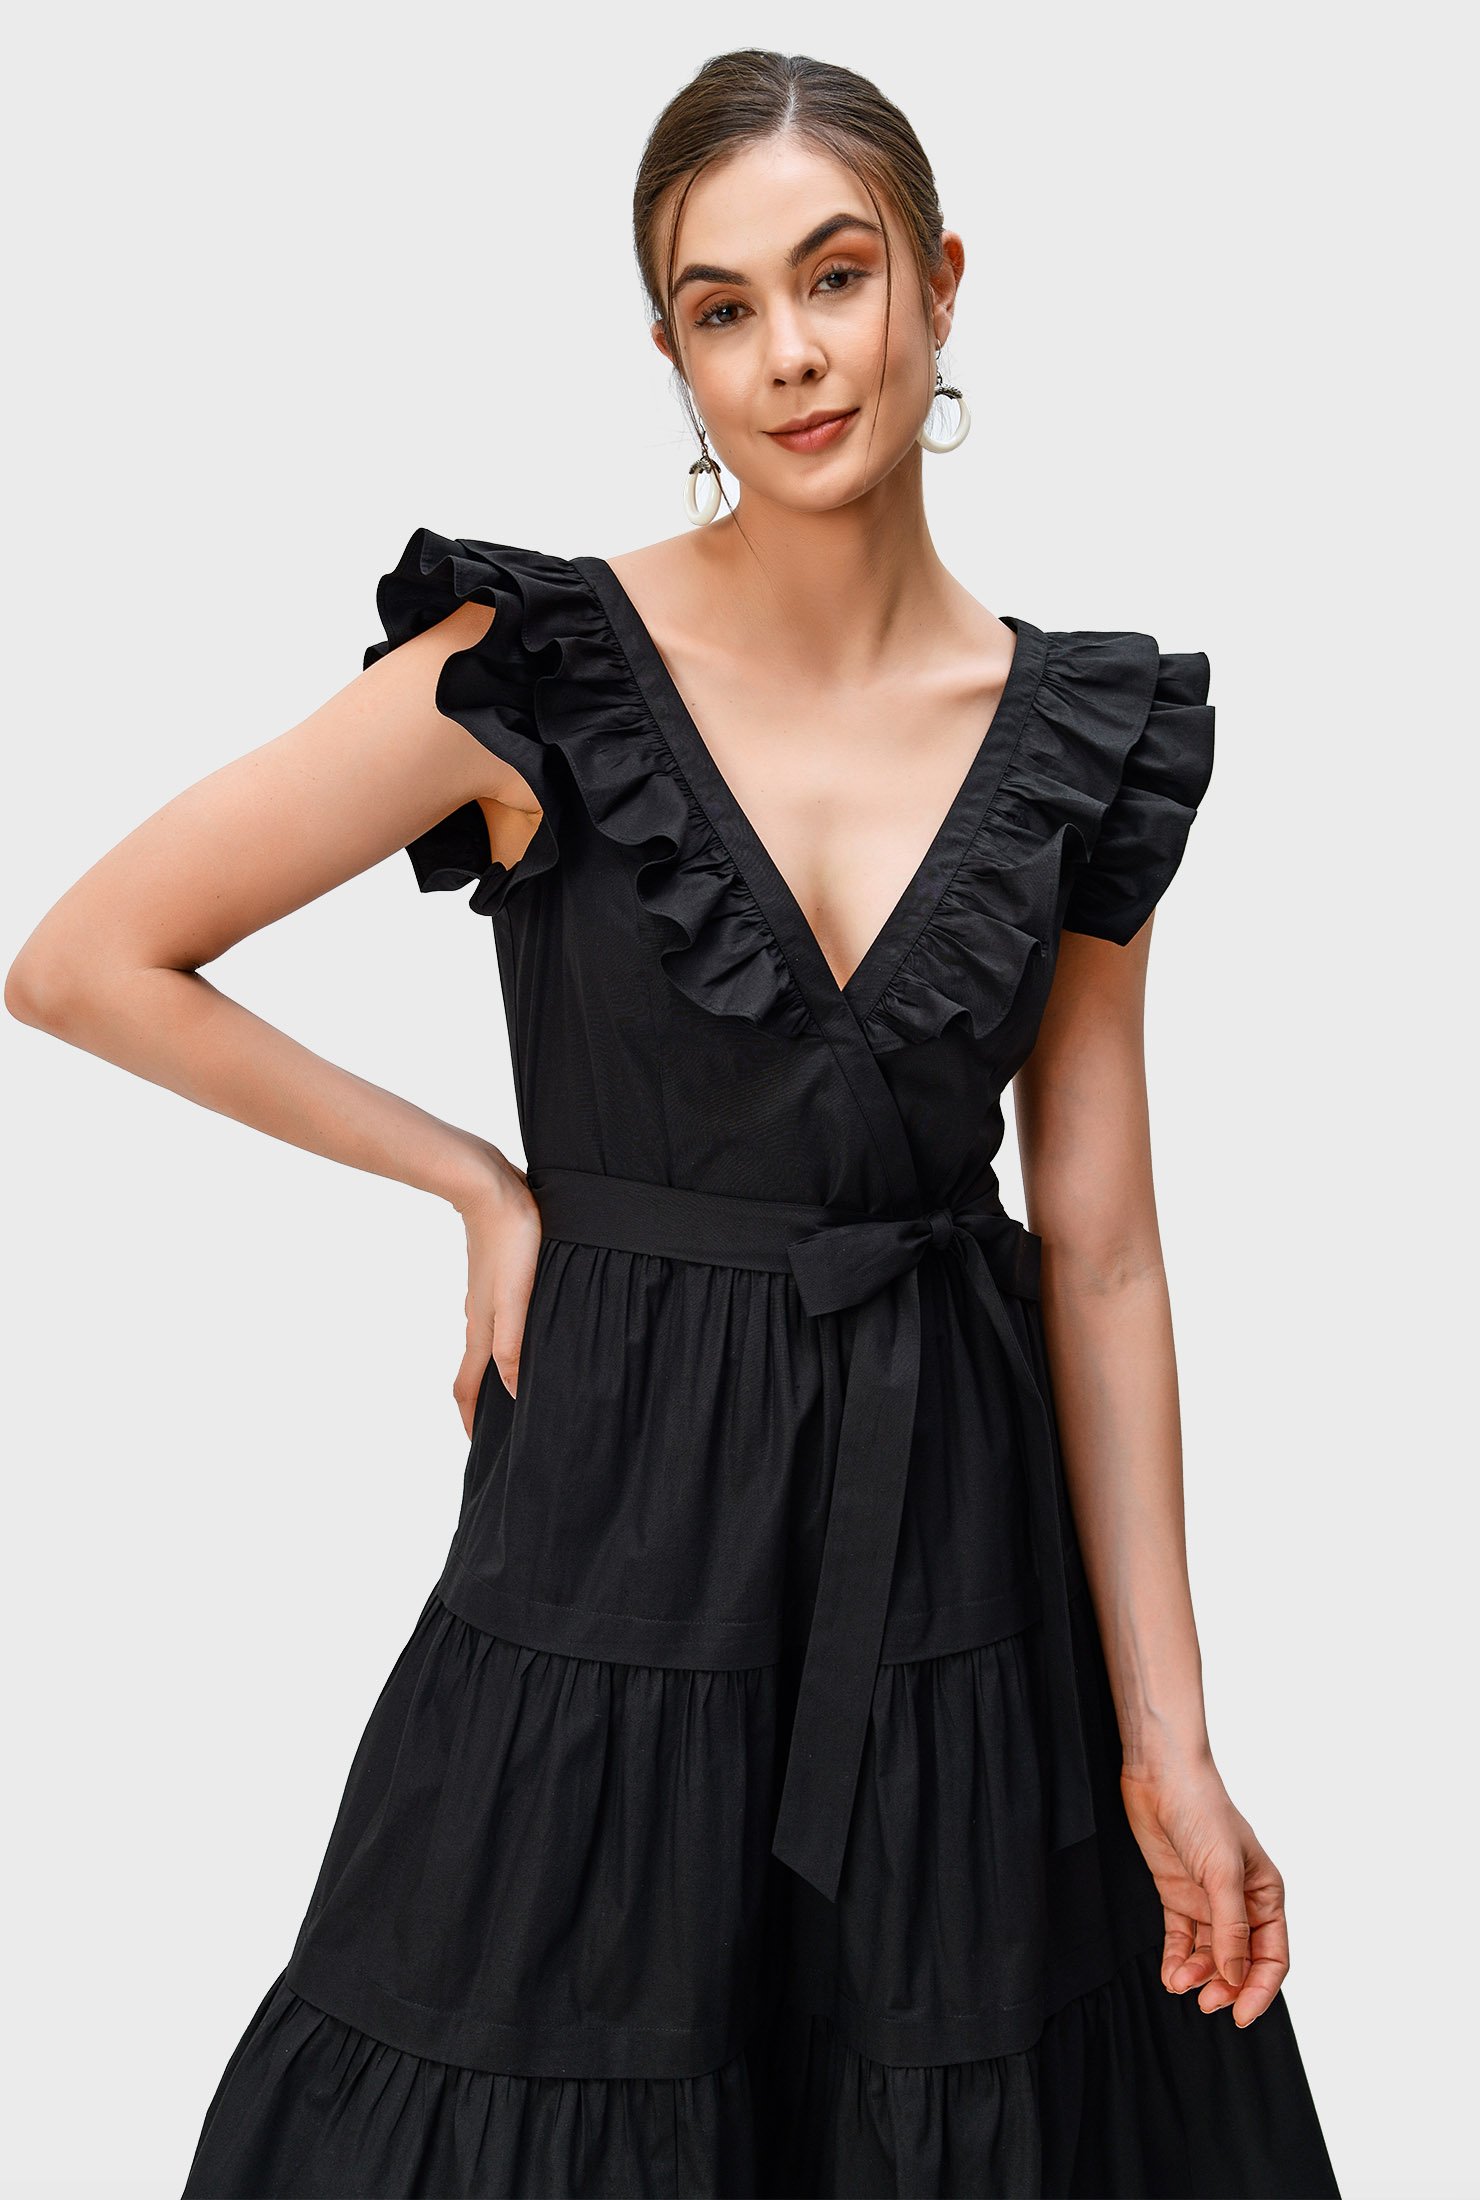 Ruched tiers form the flirty skirt of our cotton poplin dress that's textured with ruffles at the neckline and sleeves.